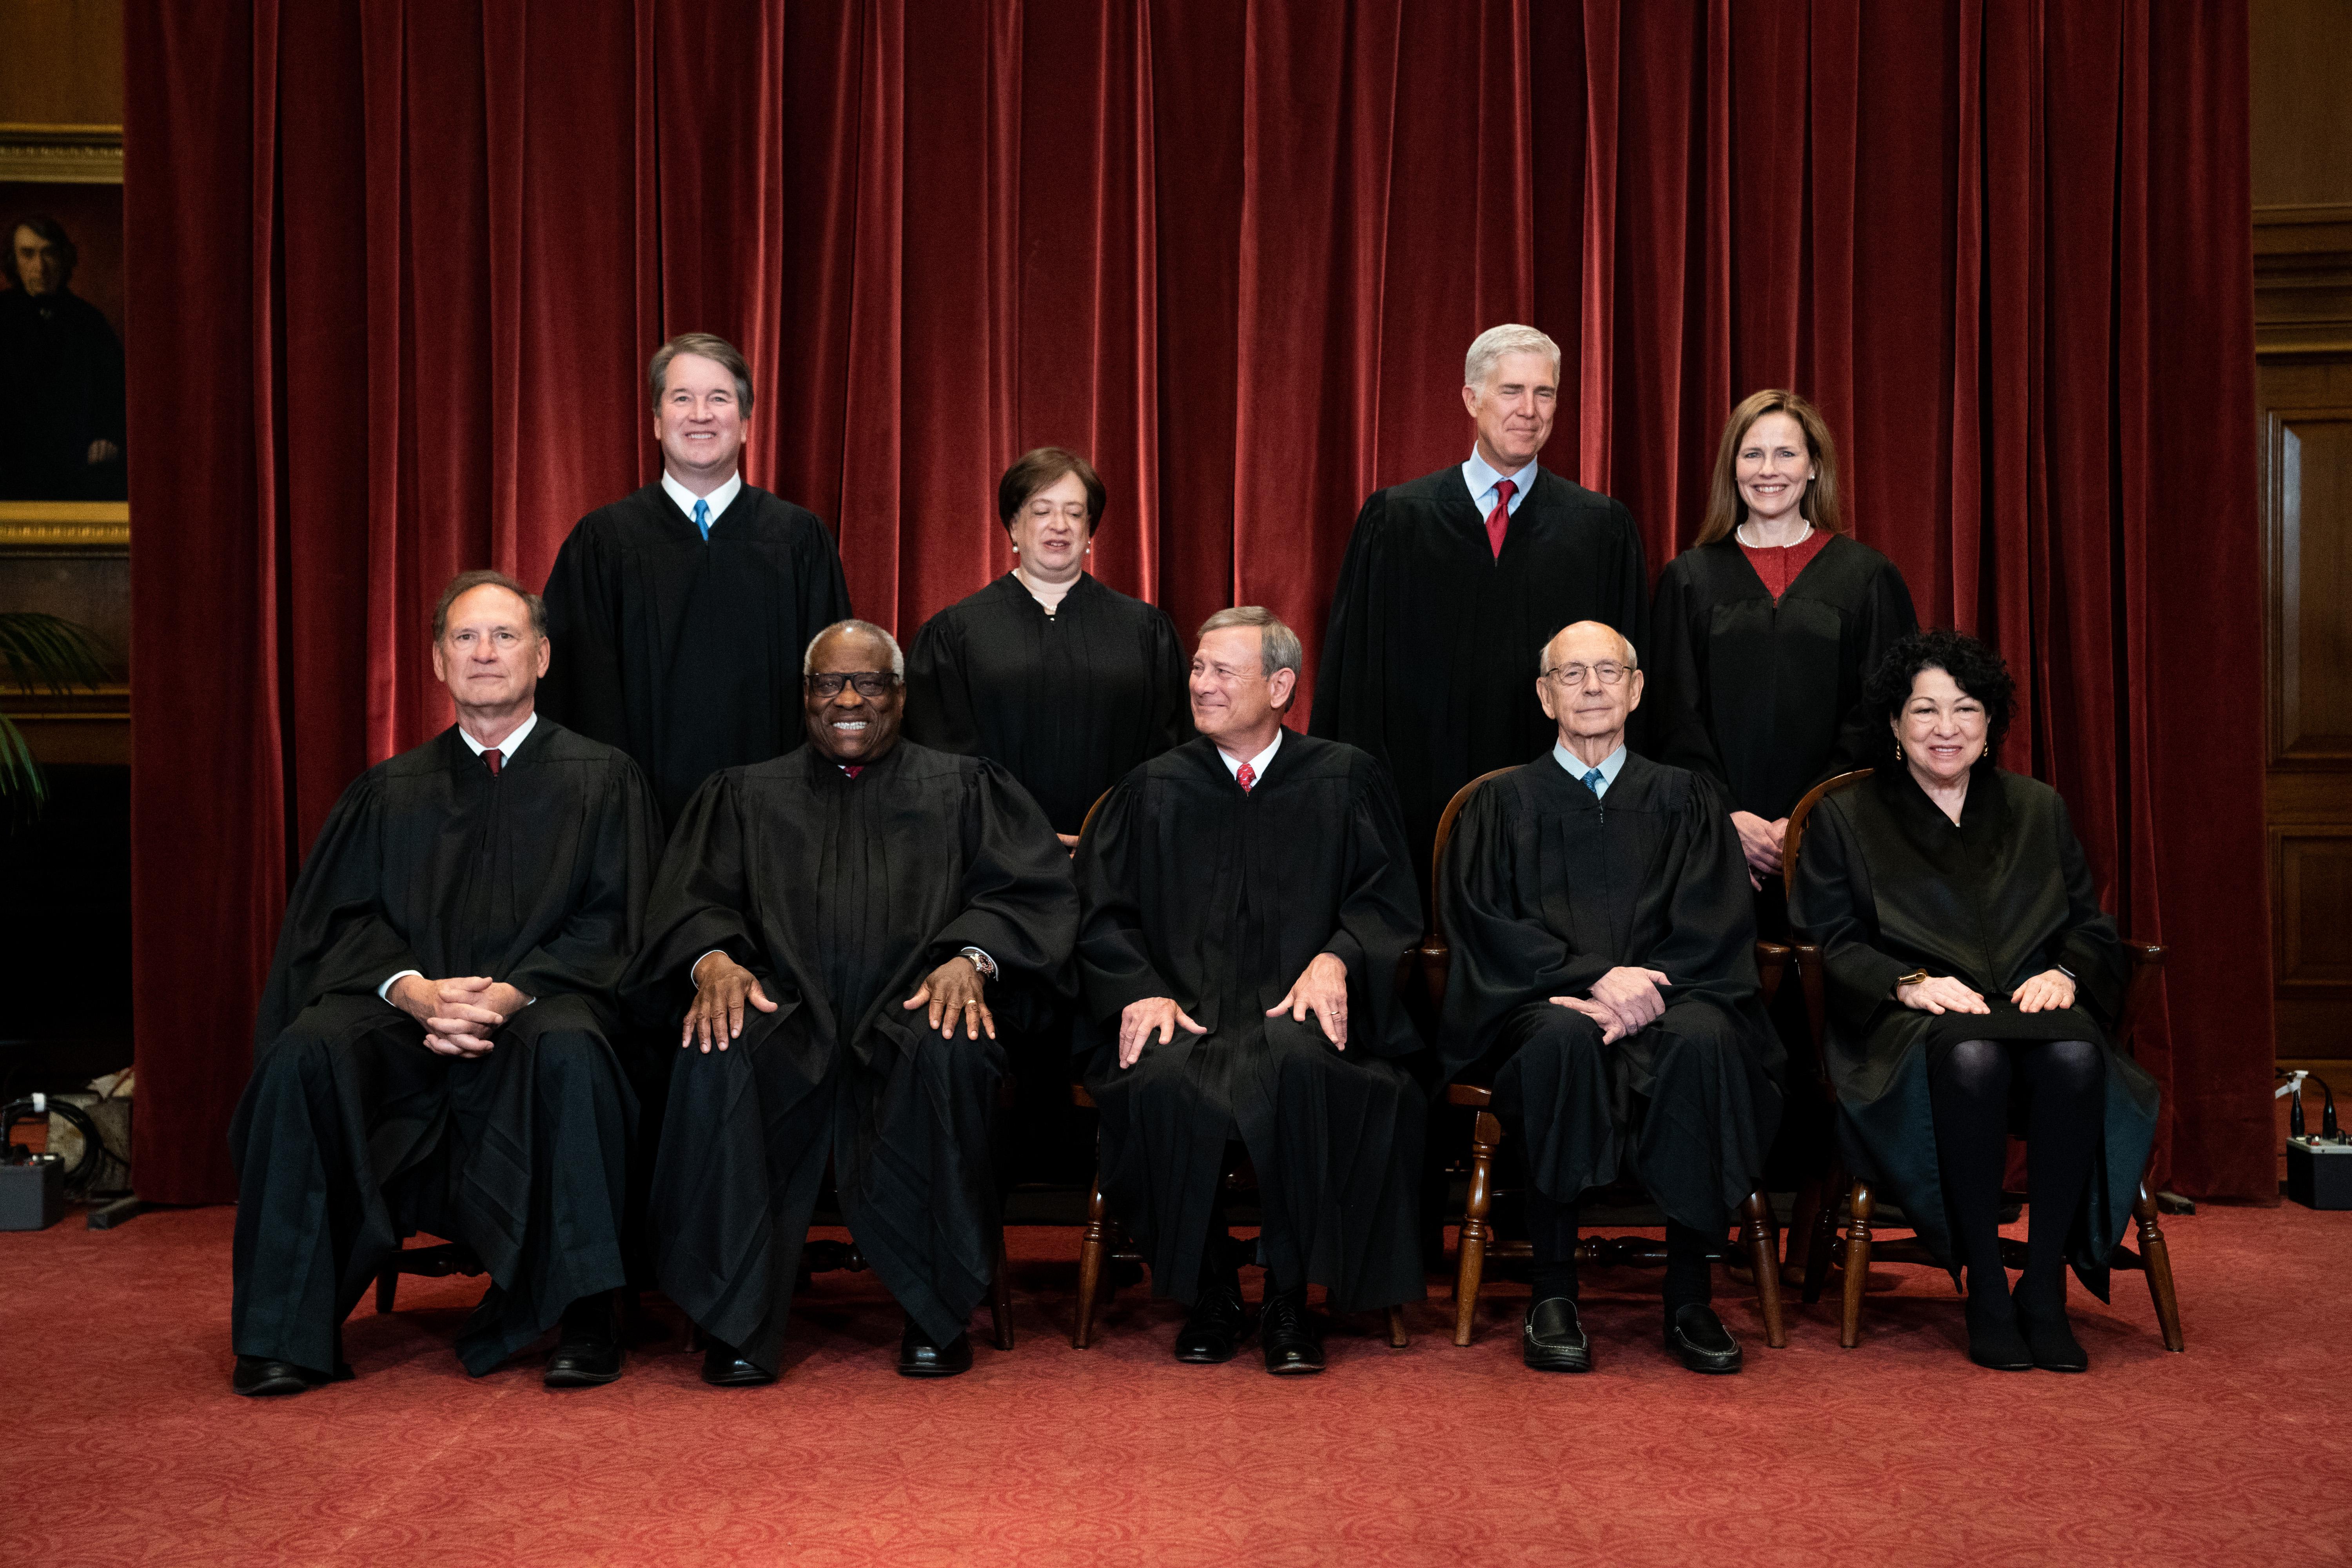 The Supreme Court justices pose for their group photo.